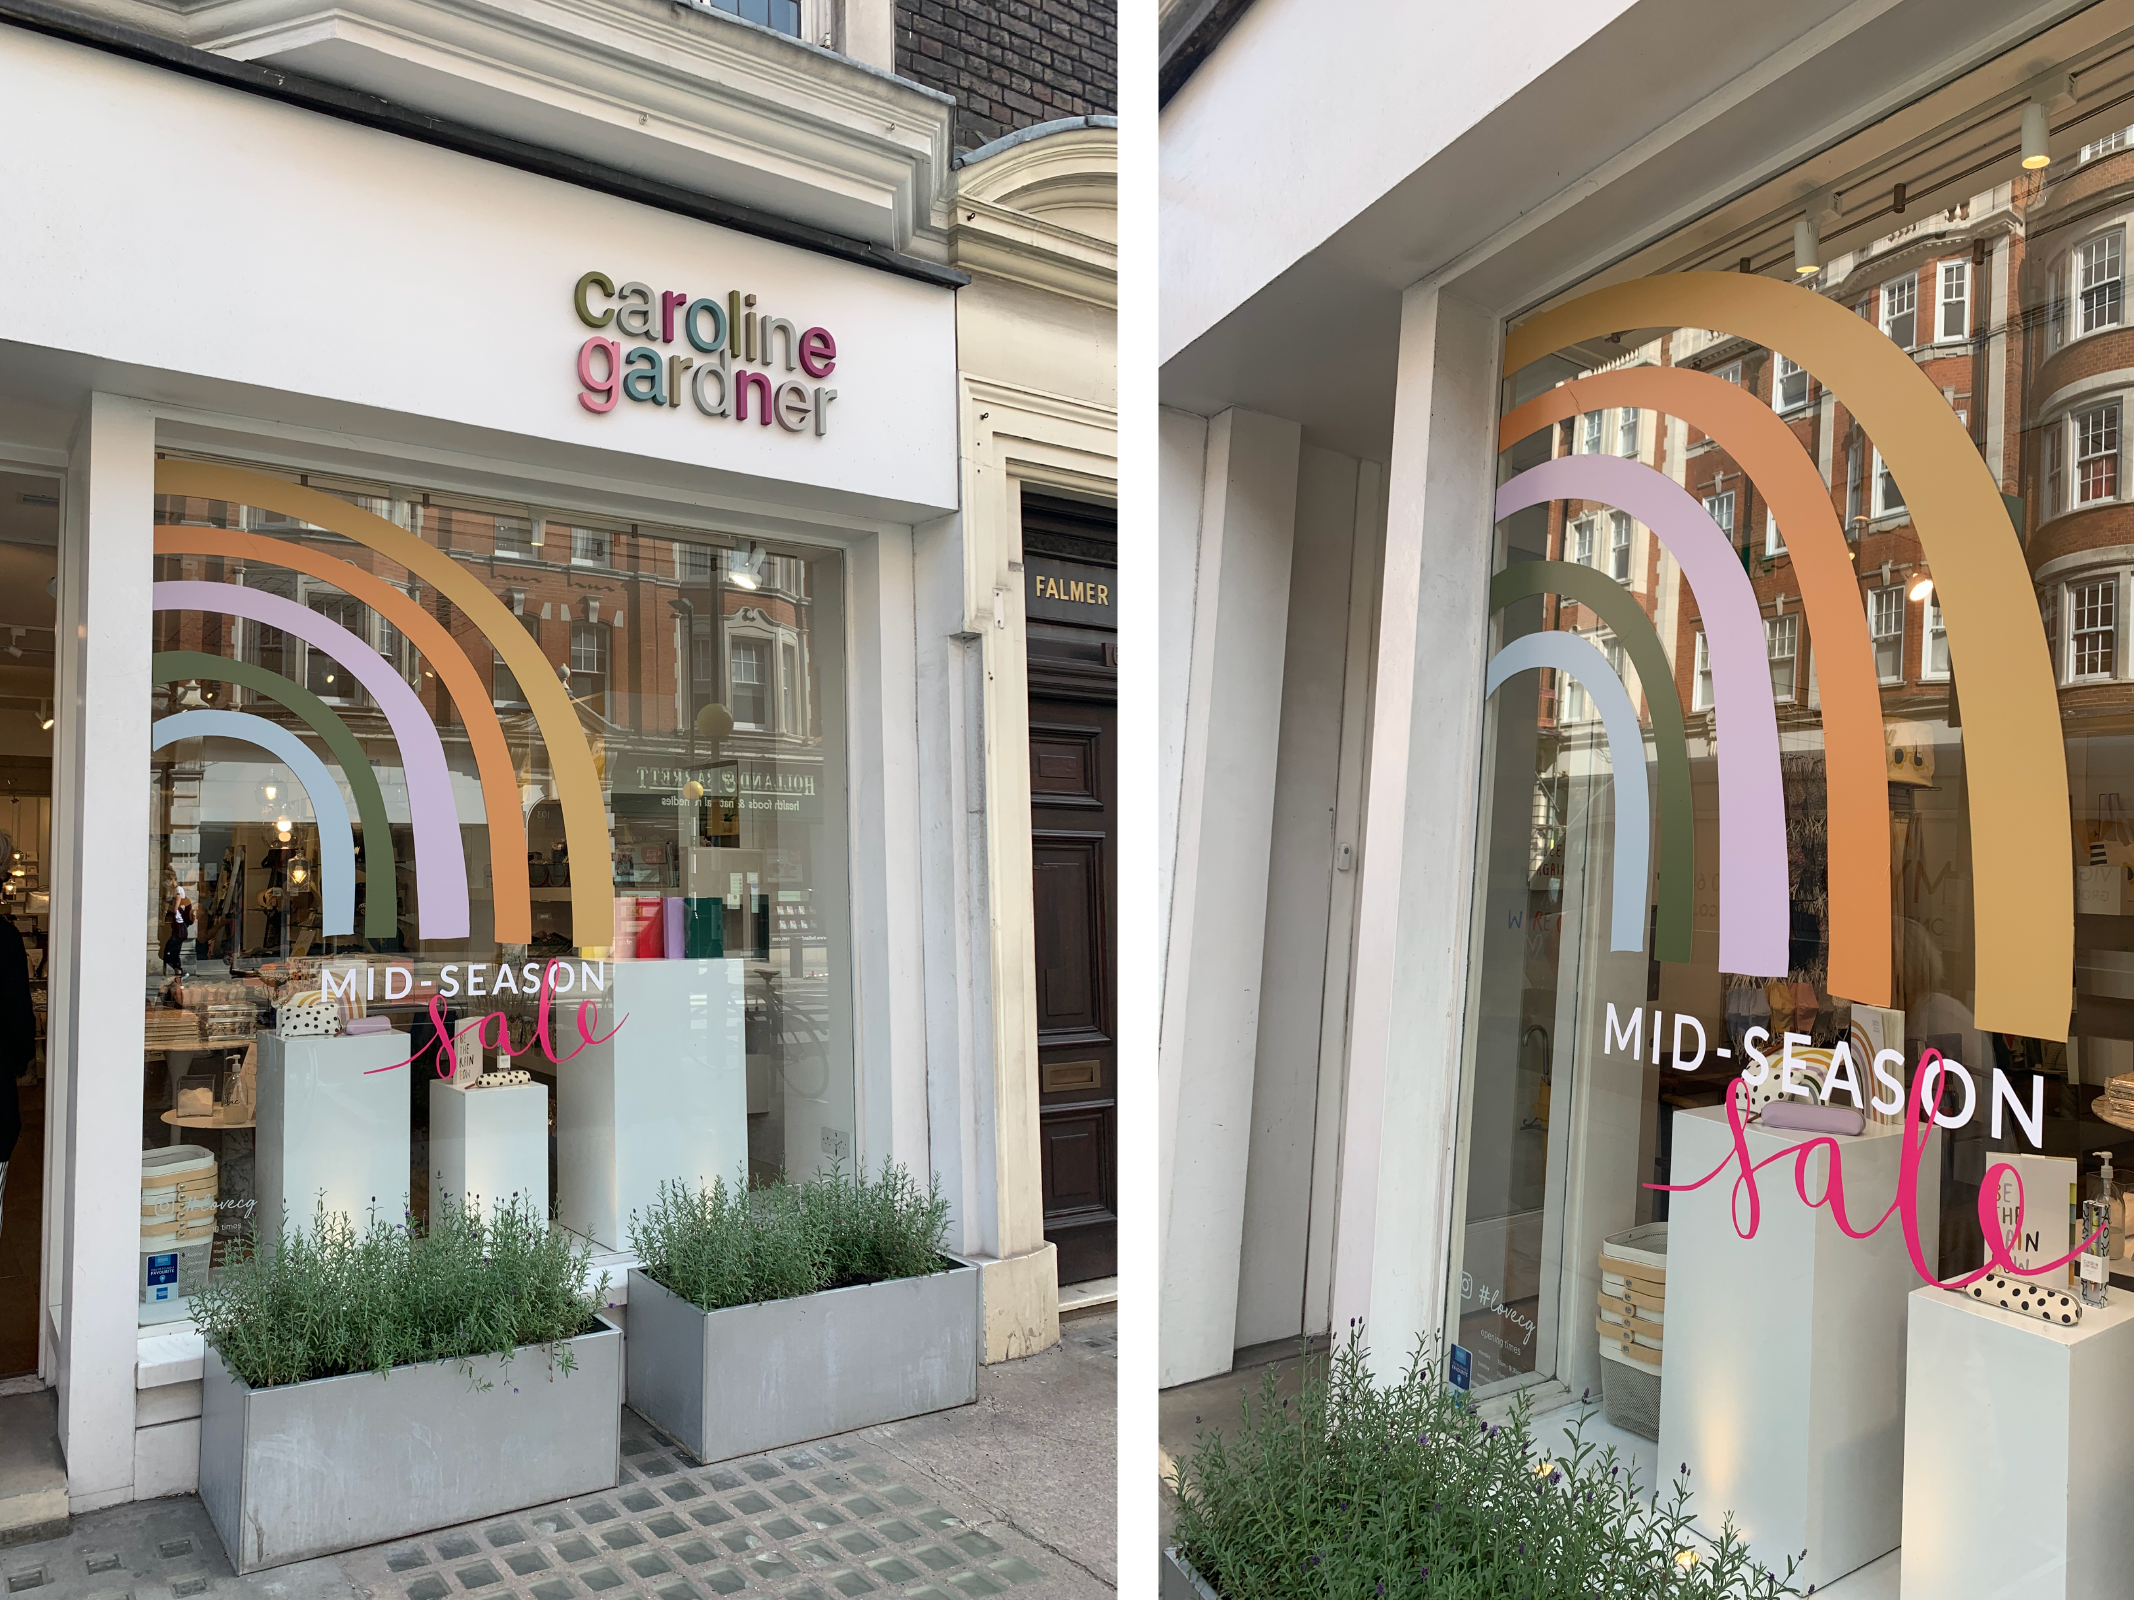 Shop signs | Office signs | Window films